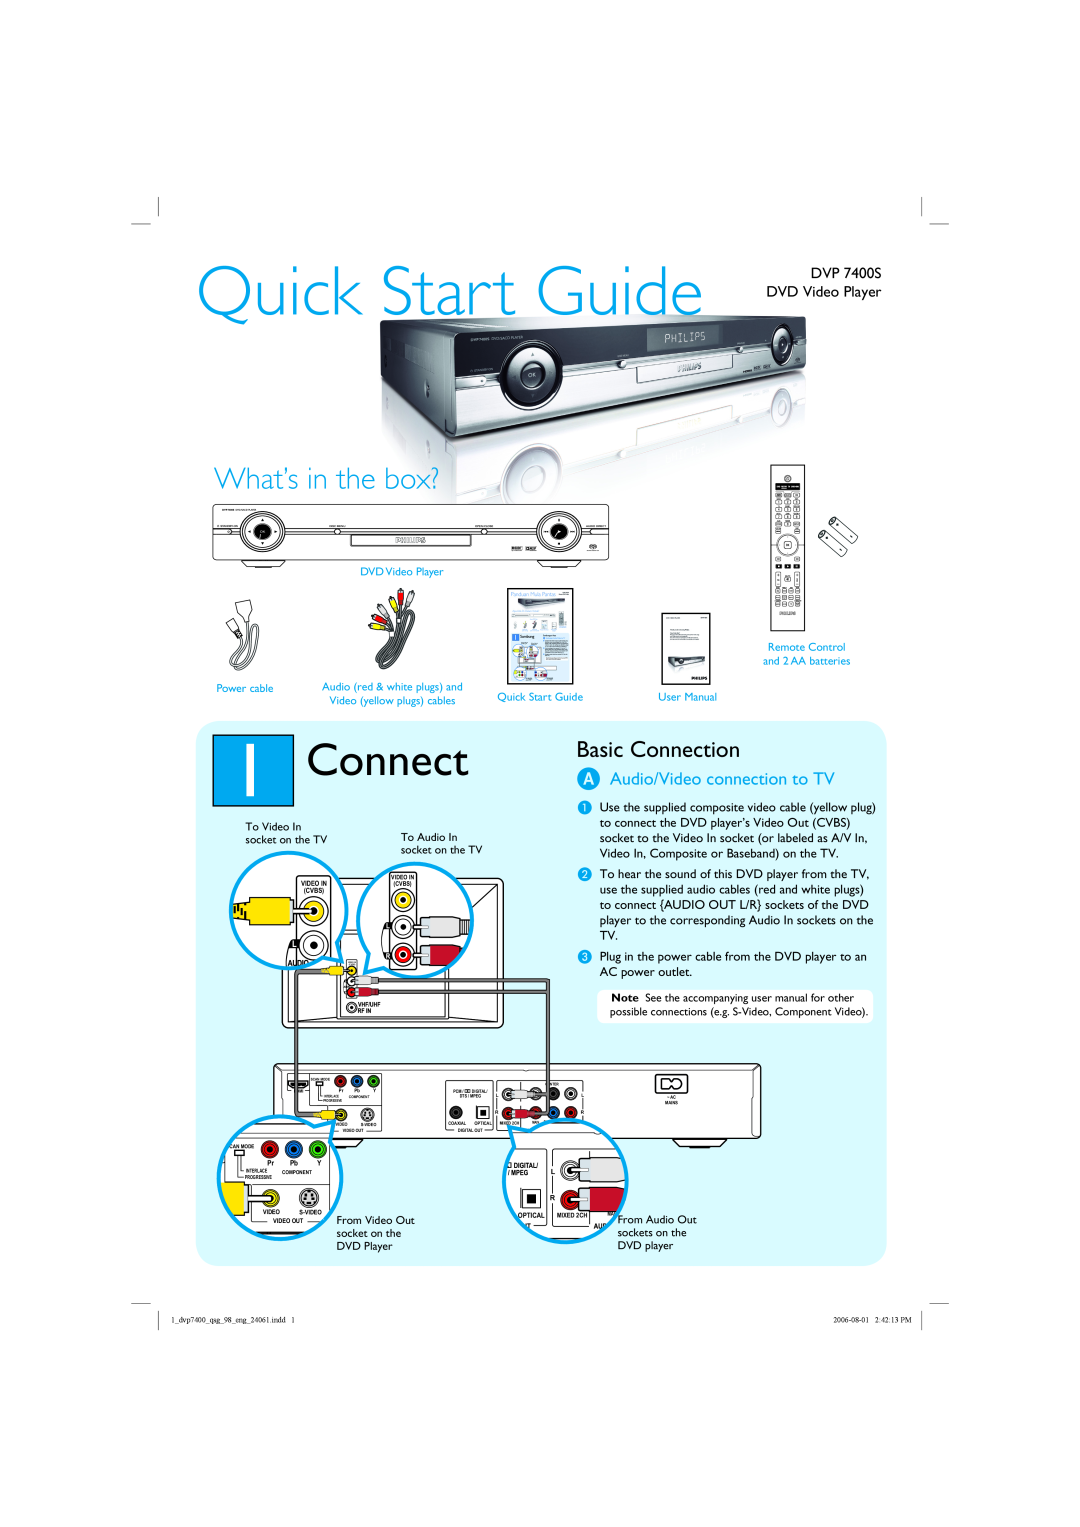 Philips DVP 7400S quick start Connect, A Audio/Video connection to TV, Quick Start Guide, What’s in the box?, Power cable 